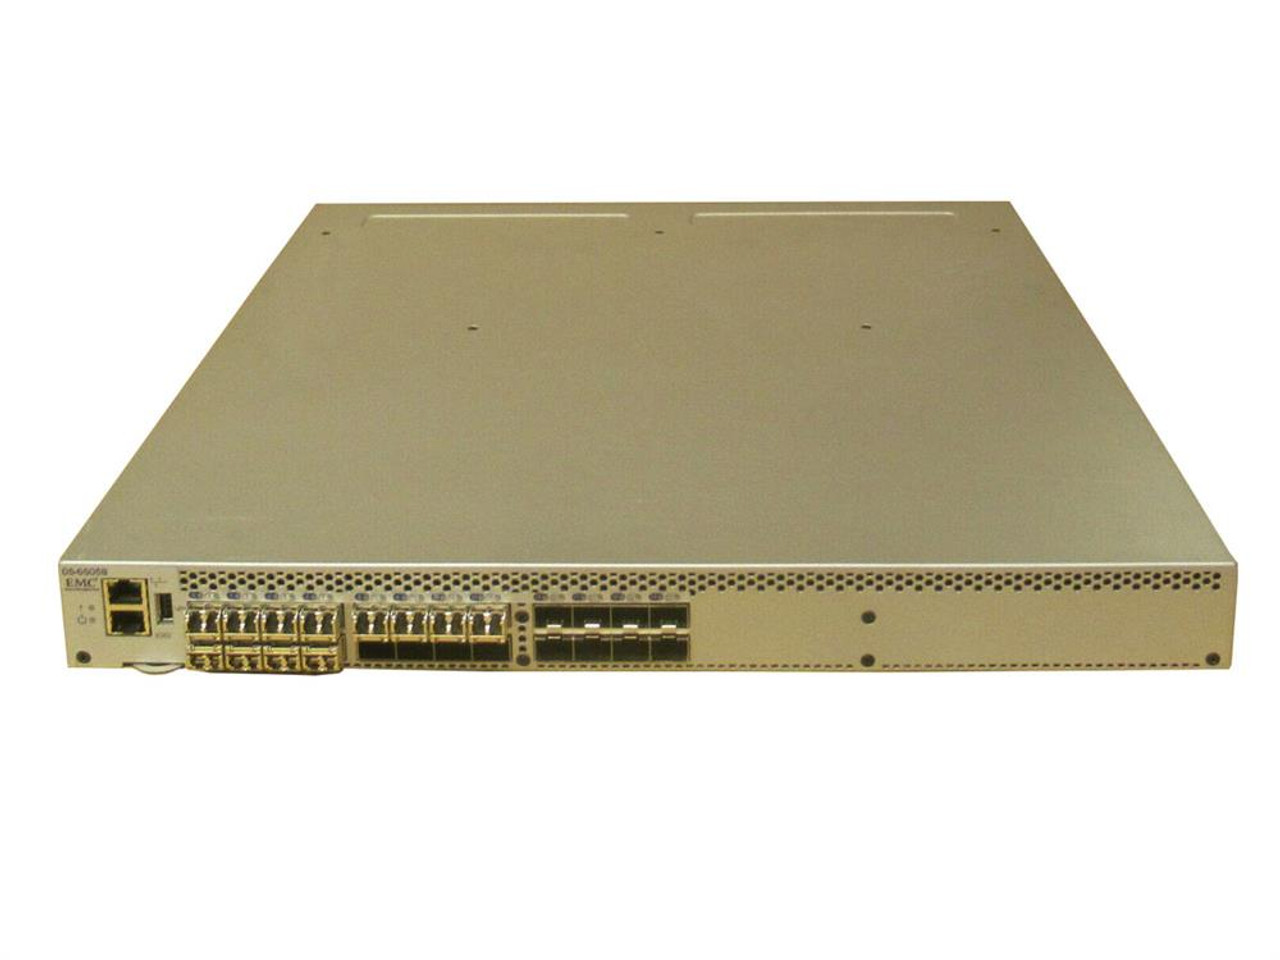 6505B Brocade 6505 Ds 24 Port Active 16Gb FC Switch 2Ps Add (Refurbished)